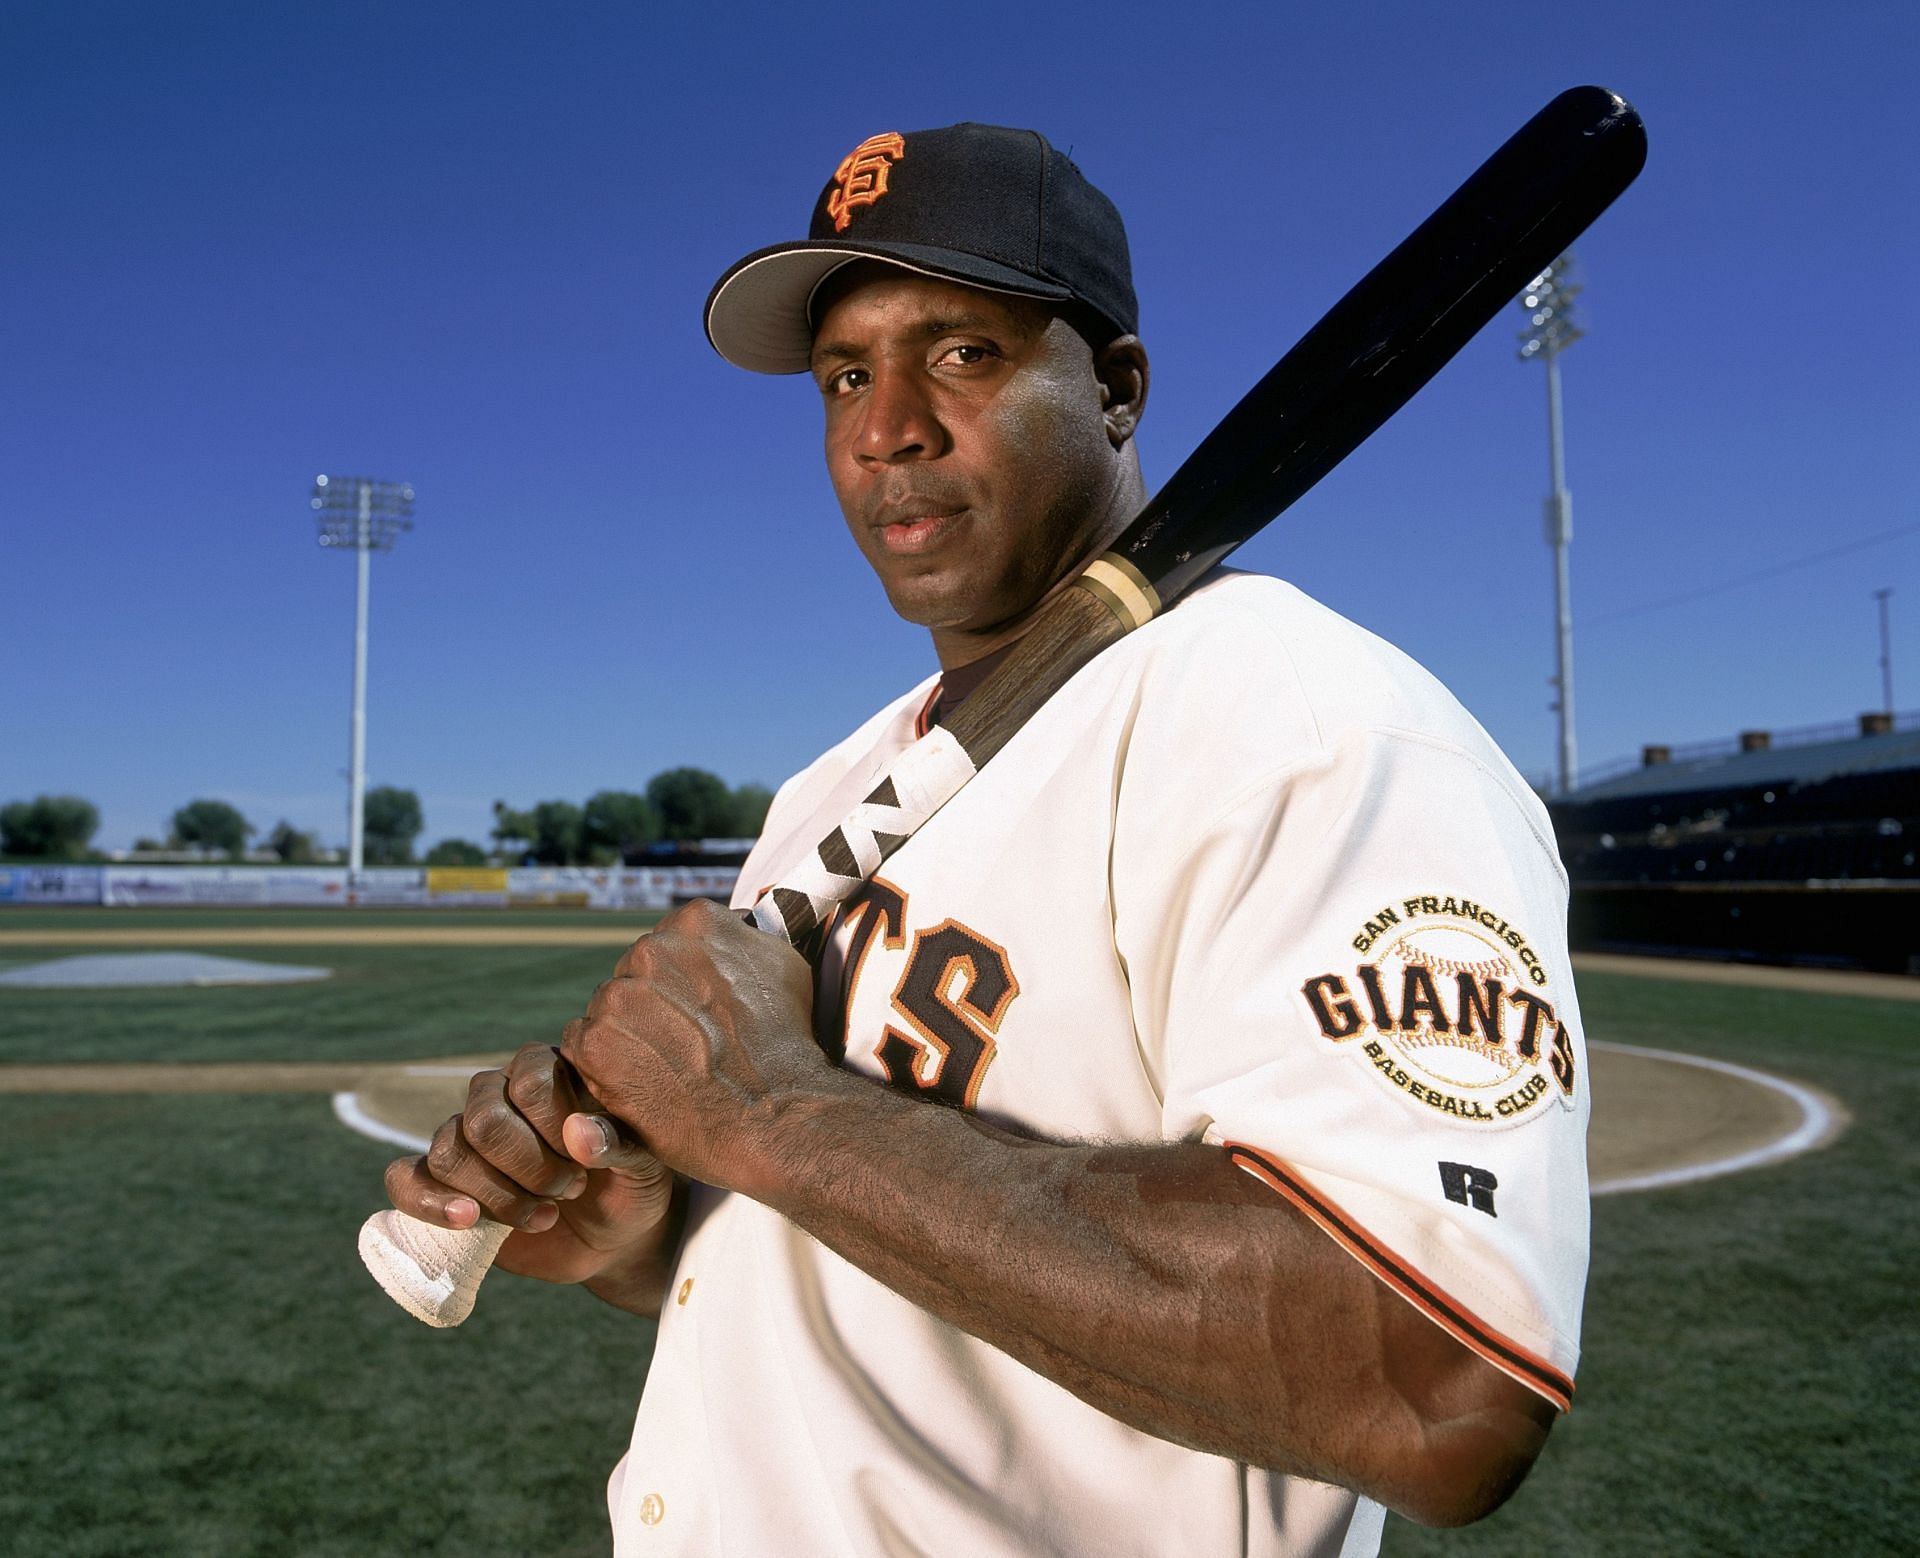 Leftfielder Barry Bonds #25 of the San Francisco Giants poses for a photo on March 16, 2004, in Scottsdale Stadium in Scottsdale, Arizona. (Photo by: Andy Hayt/Getty Images)